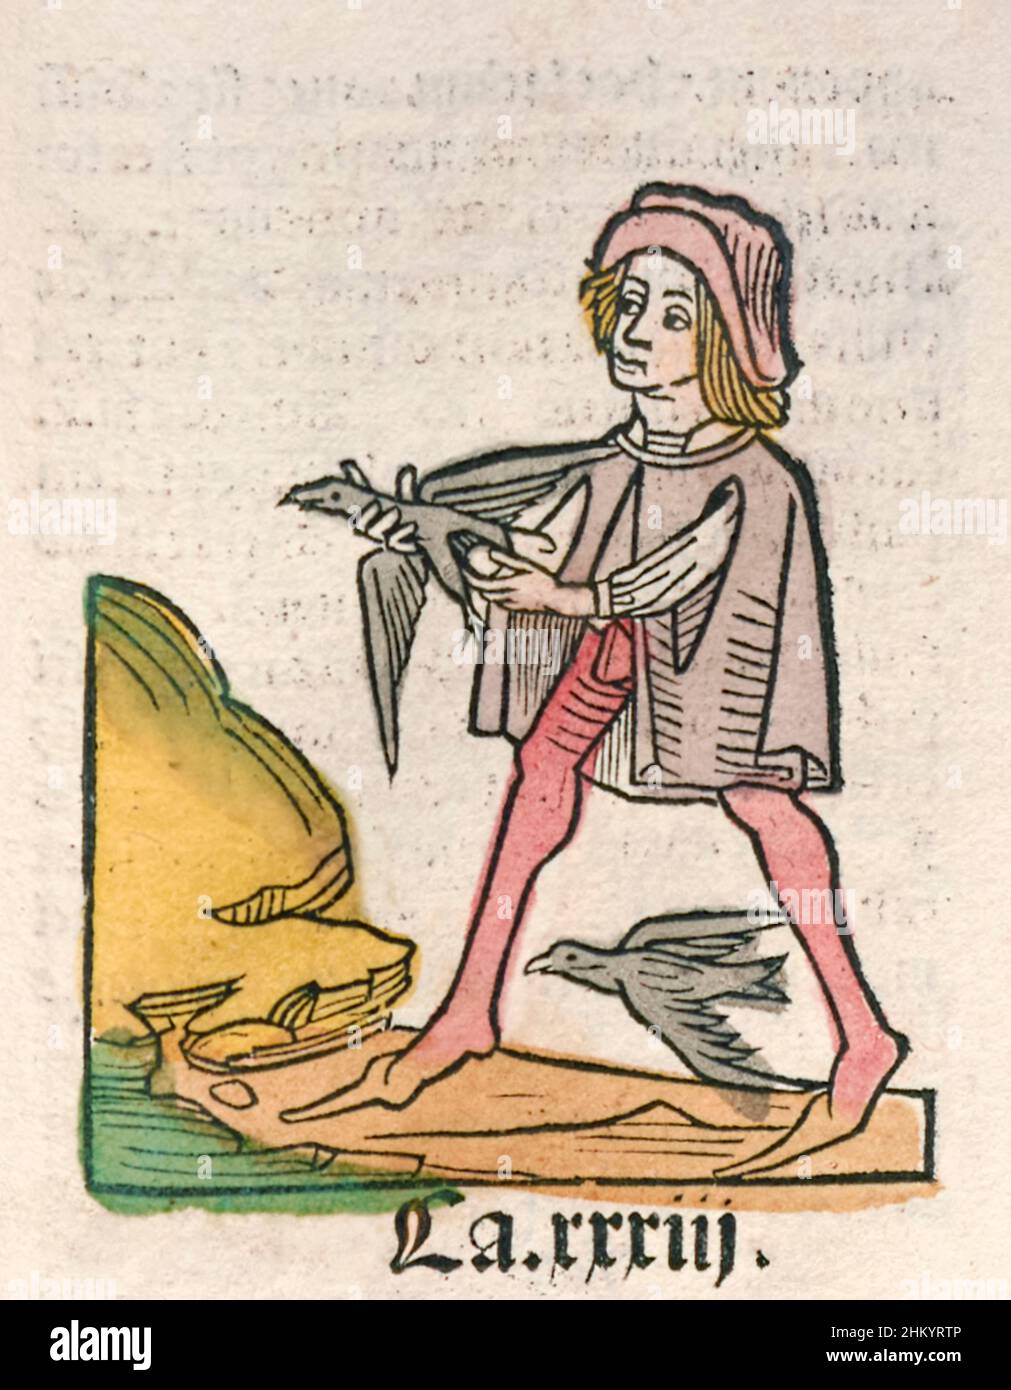 Hortus Sanitatis [The Garden of Health] by Jacob Meydenbach published in 1491 in Mainz, Germany describes species of plants with medicinal uses. Photograph shows hand coloured woodcut illustration of a man extracting a swallow stone (chelidonius) which was believed to alleviate melancholy and periodic psychosis. Stock Photo